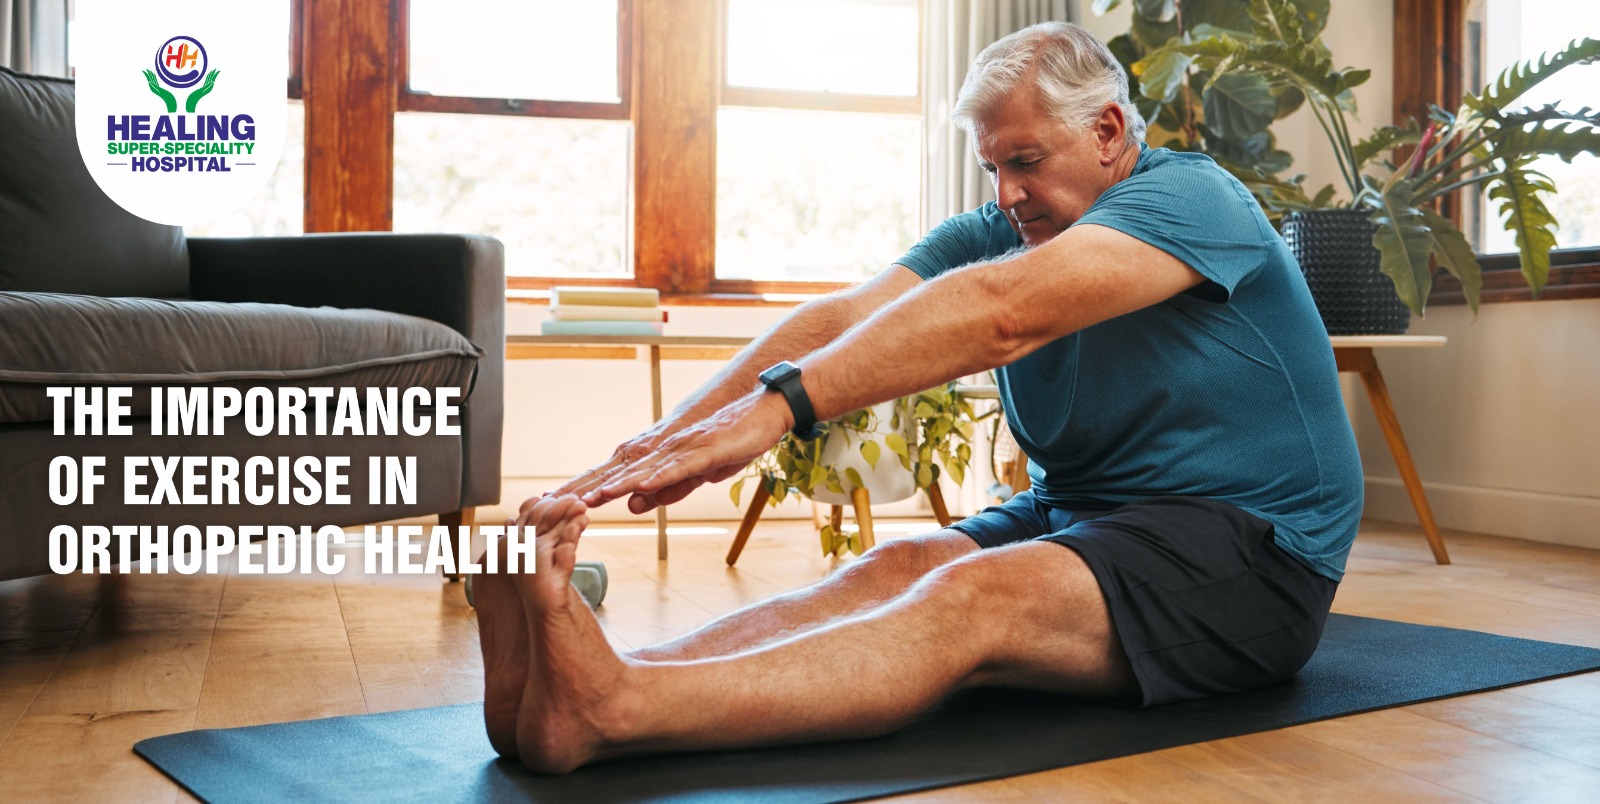 The Importance of Exercise in Orthopedic Health